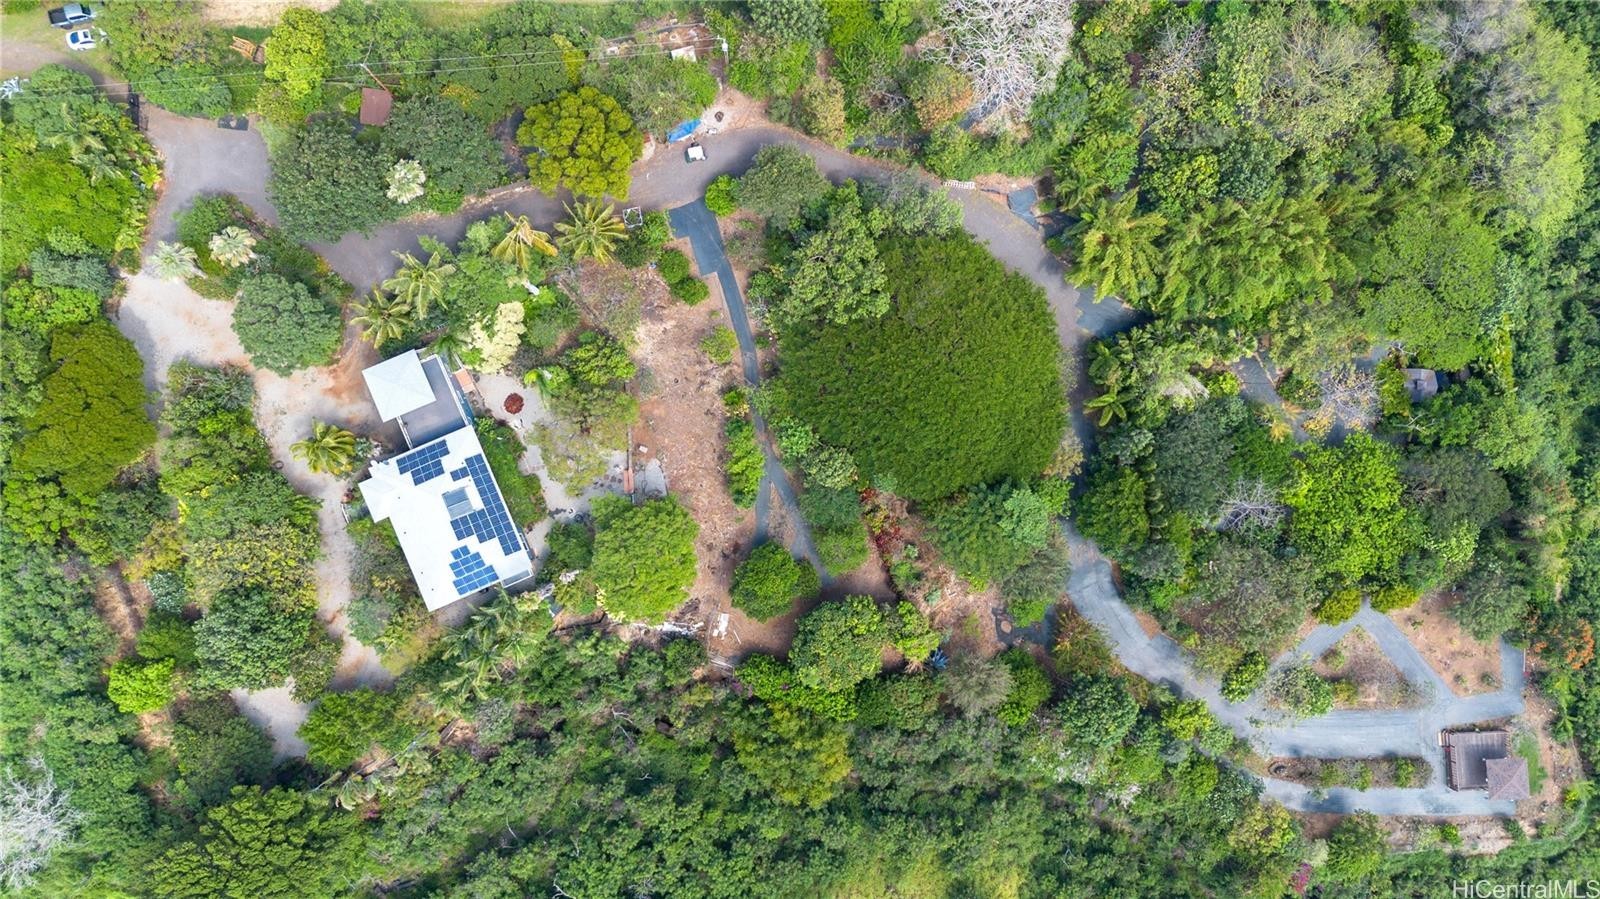 2. 85-1759a Waianae Valley Road